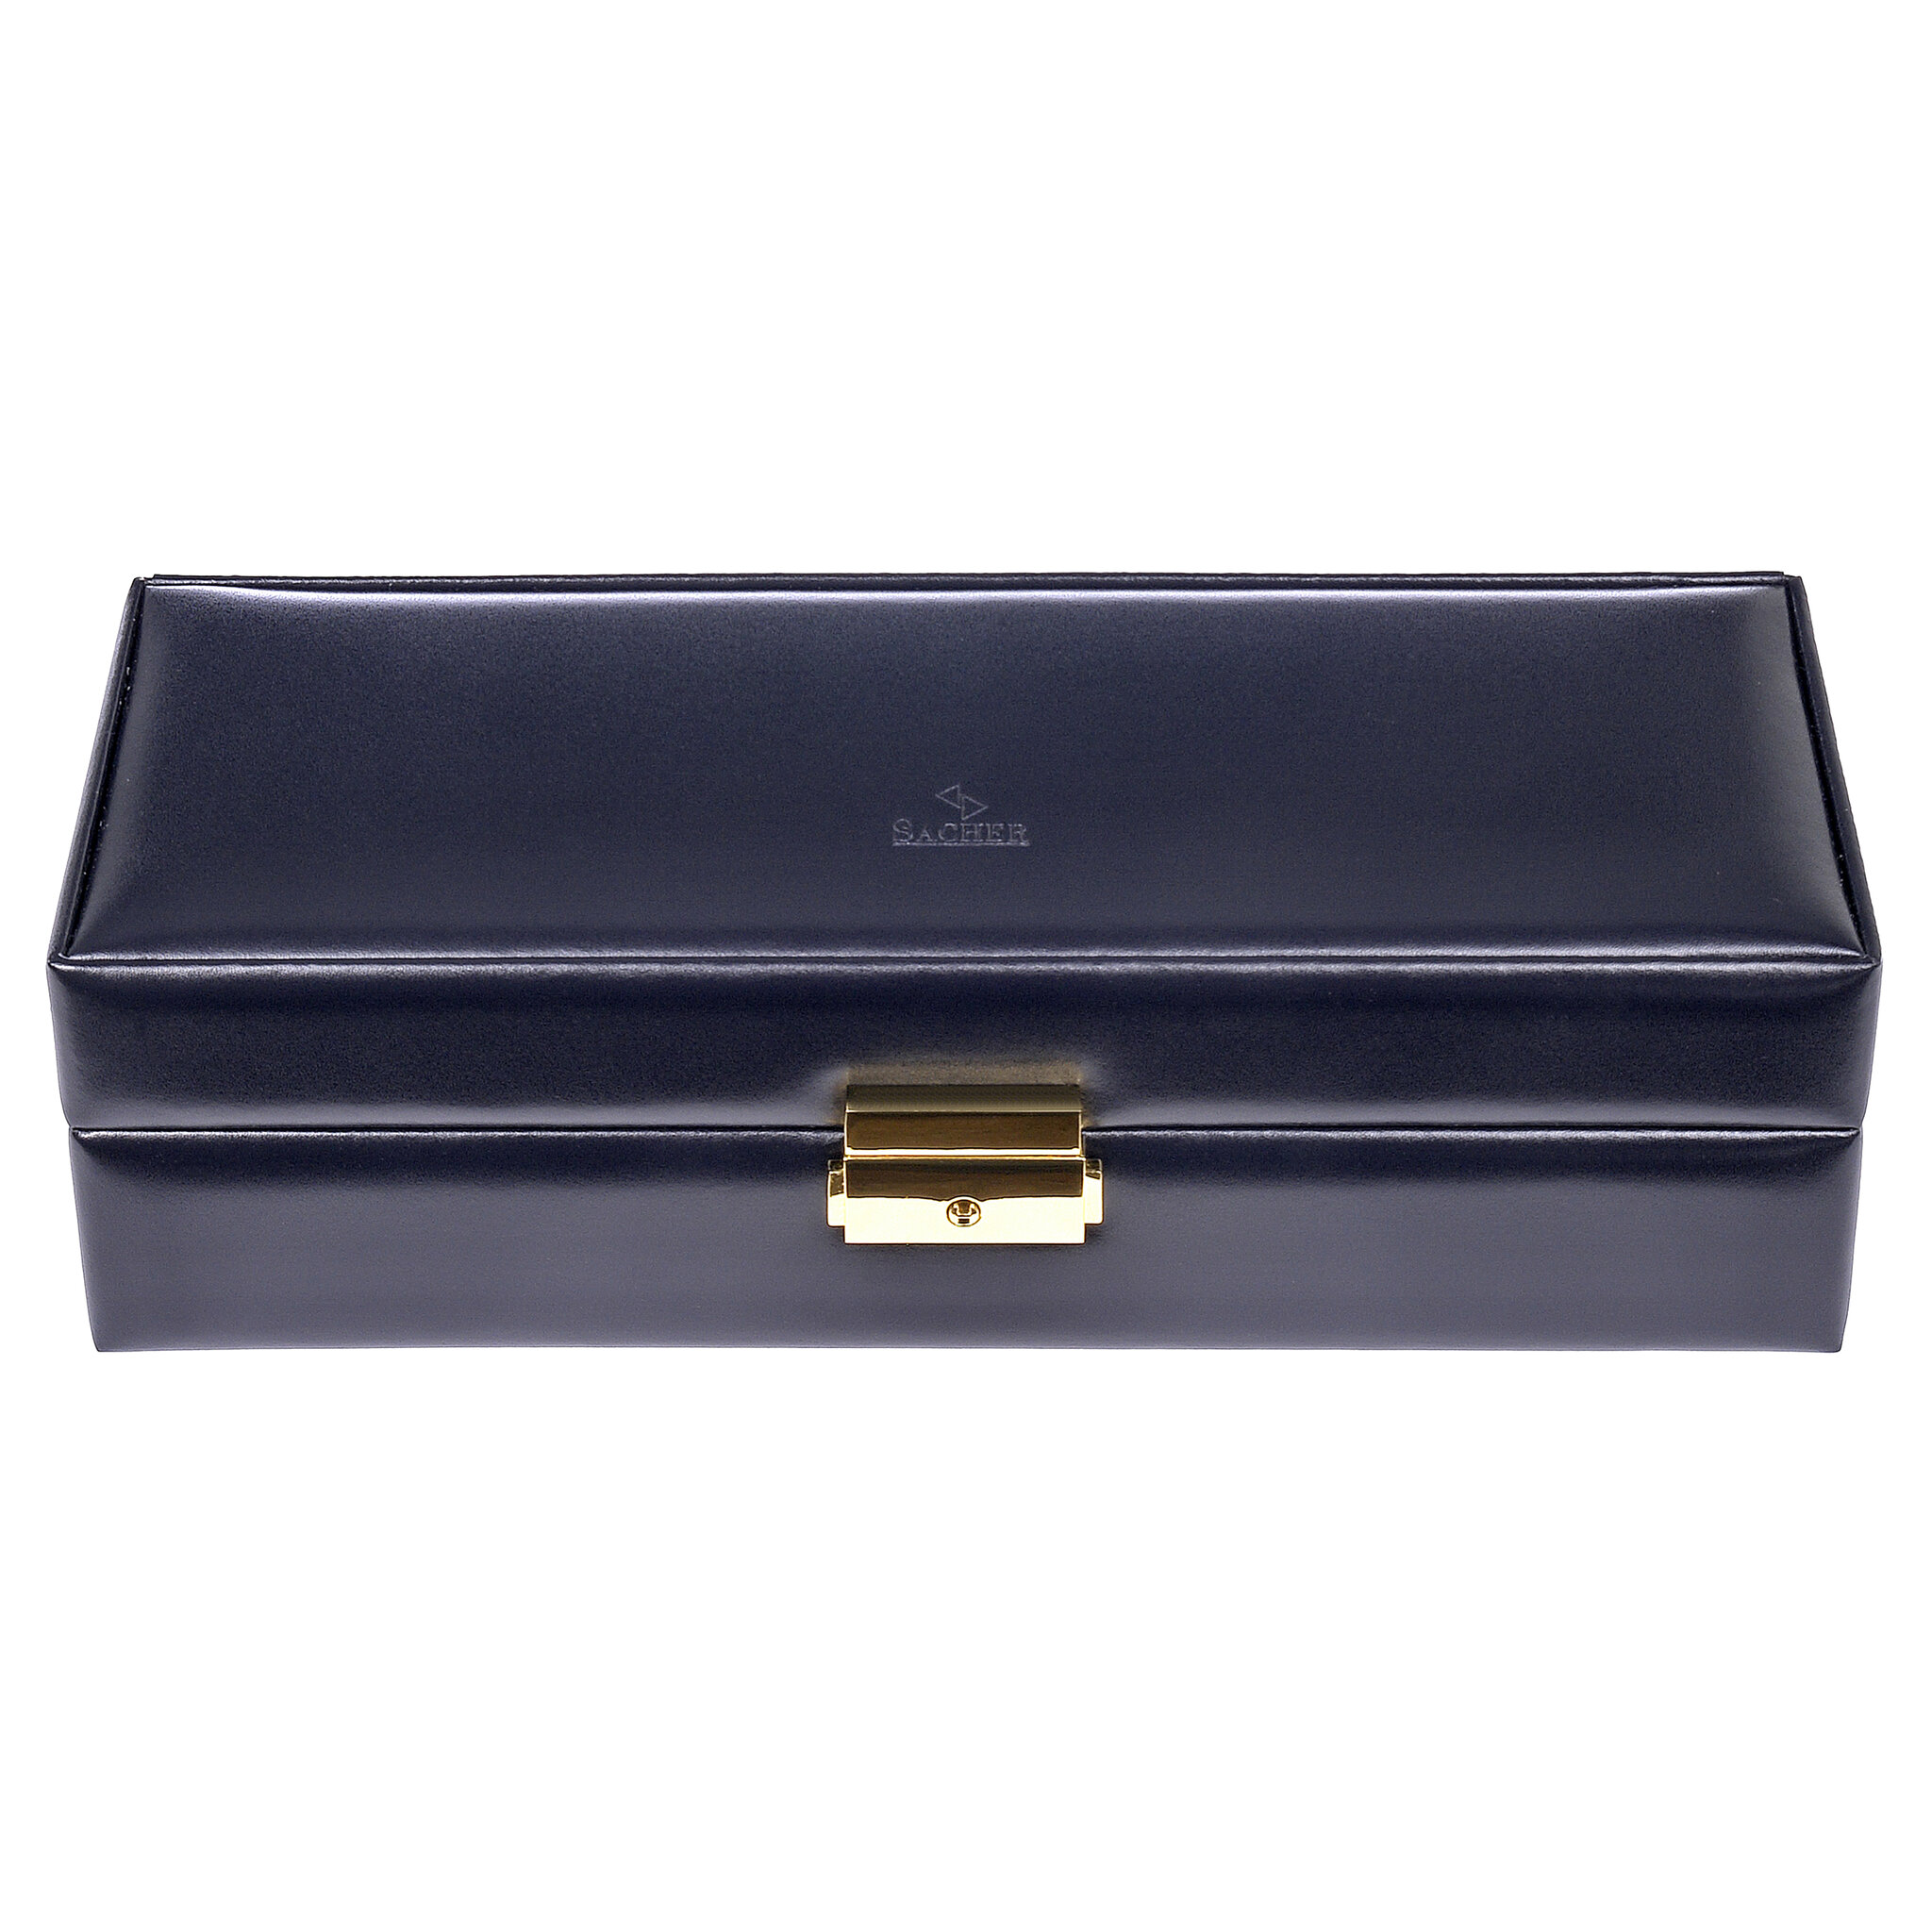 Watch case for 5 watches acuro / navy (leather) 